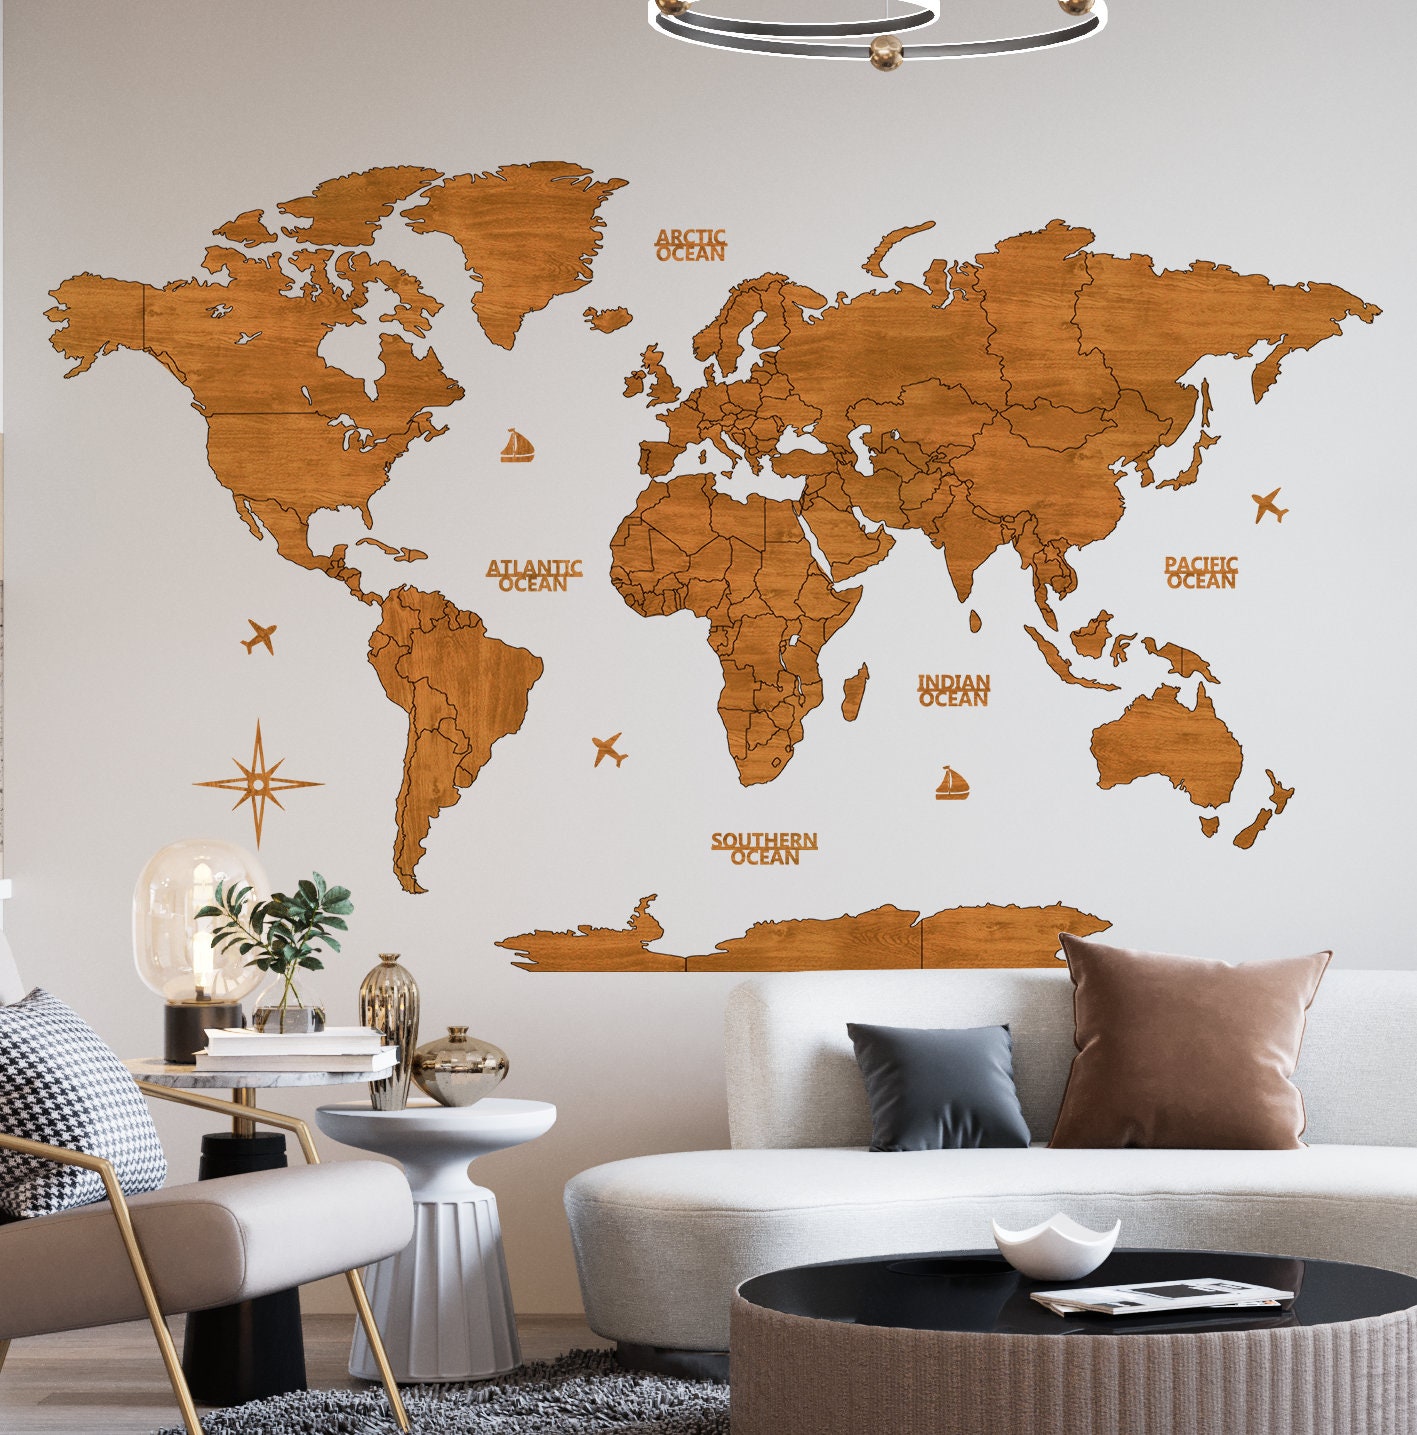 Large Rustic Wood World Map – Modern Rustic Home